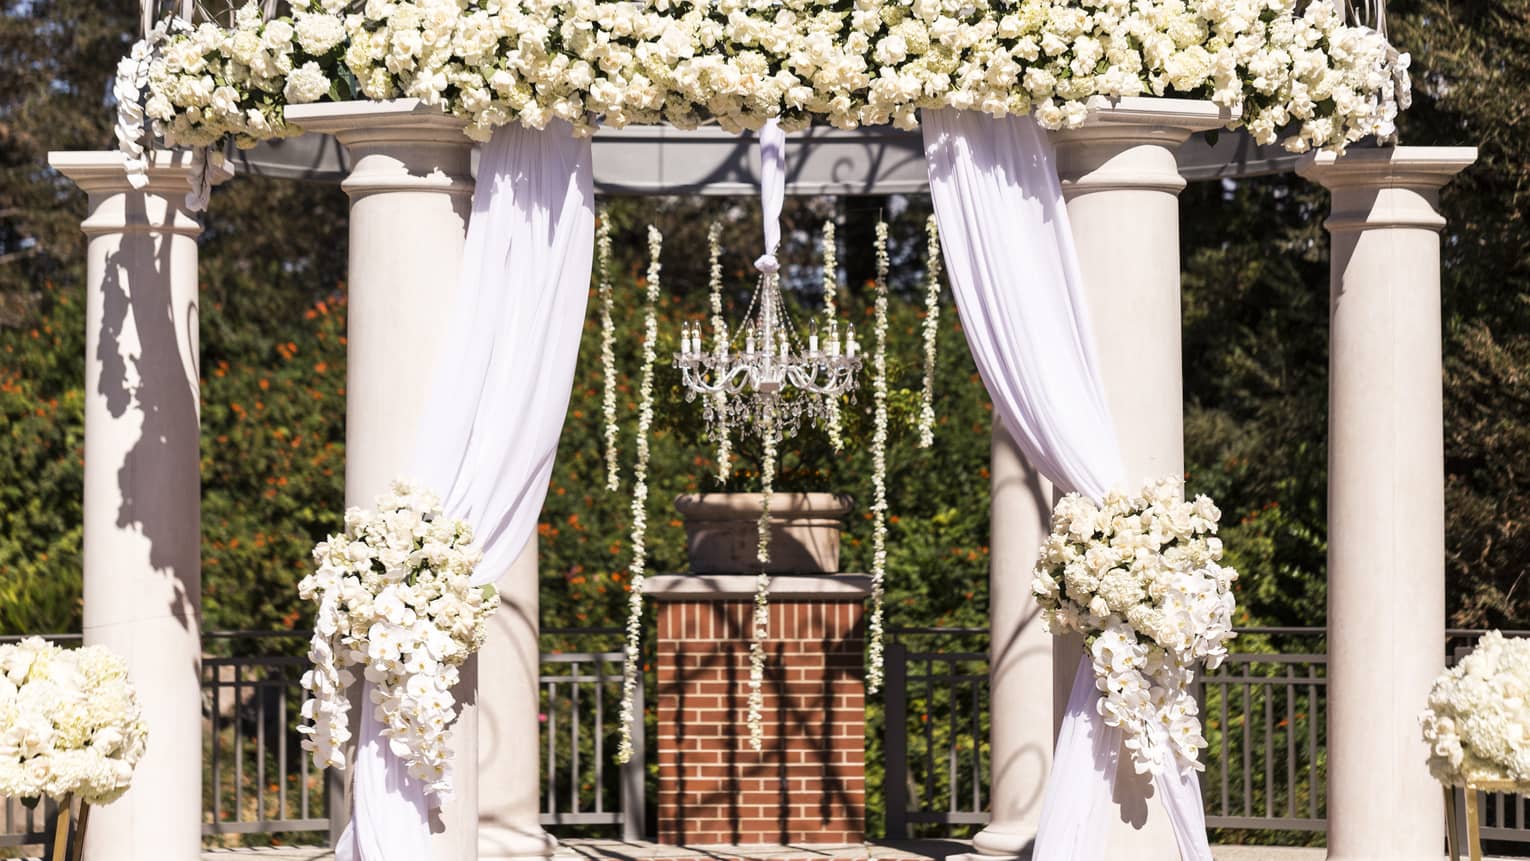 Outdoor wedding ceremony altar with white drapes, flowers